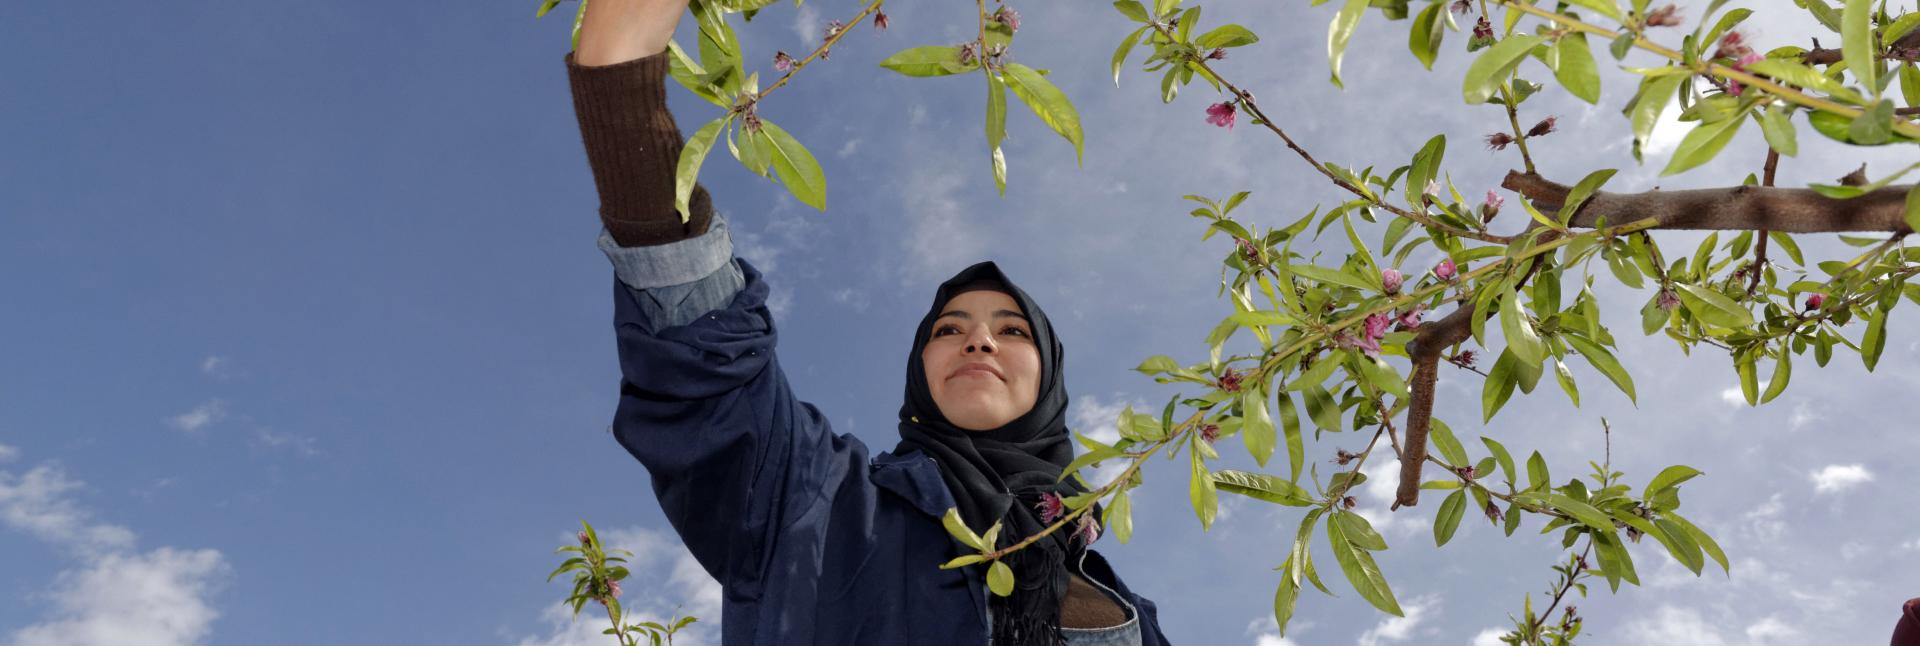 A young lady is pictured from below as she extends her arm proudly to reach for a tree branch.